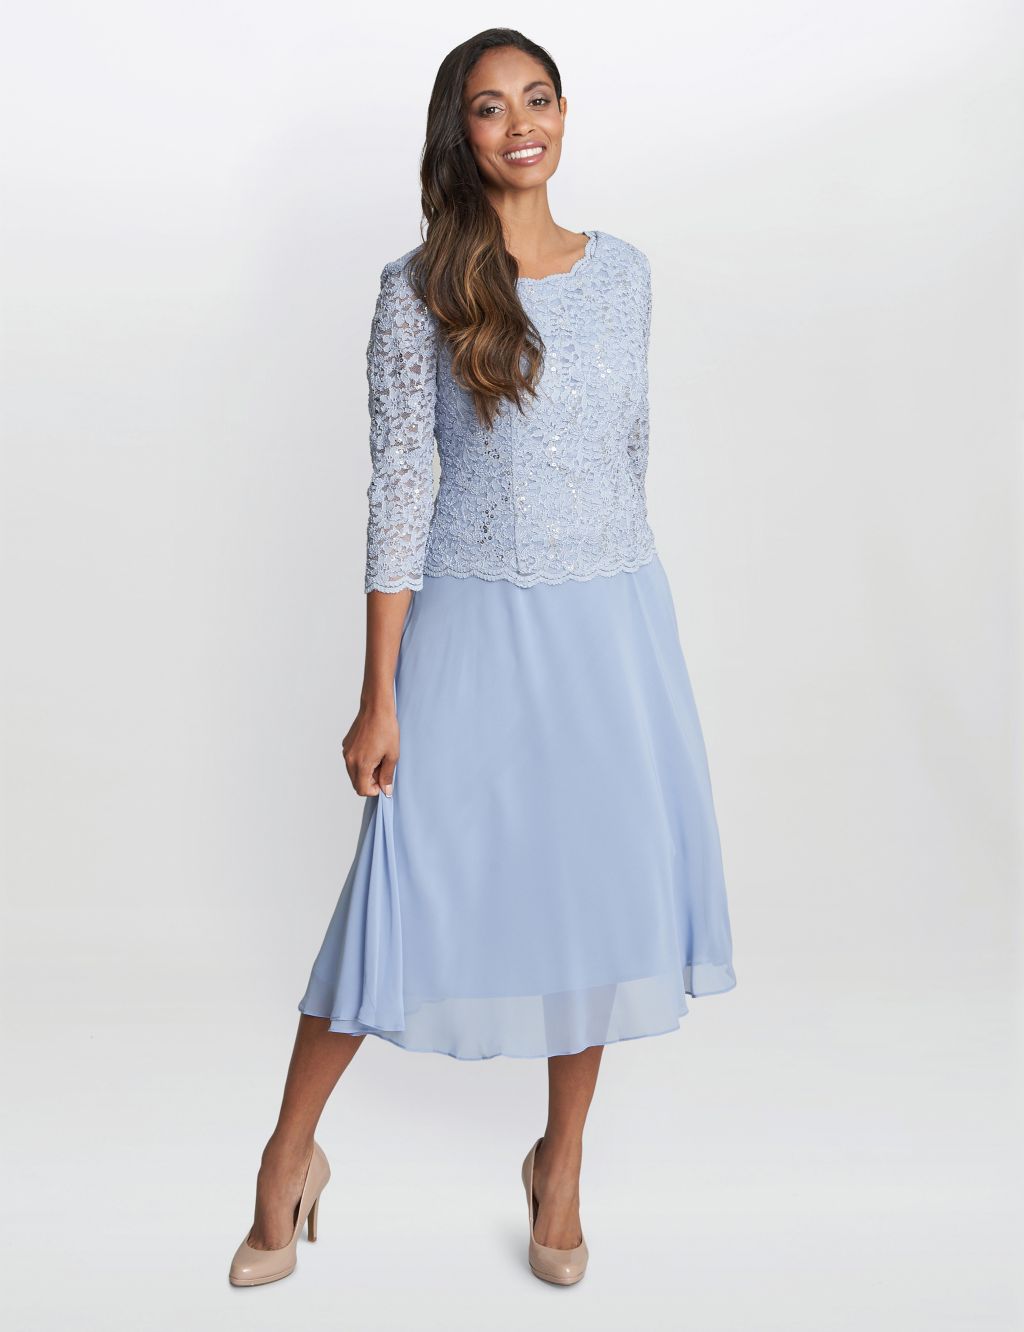 Embroidered Lace Round Neck Midi Swing Dress image 1